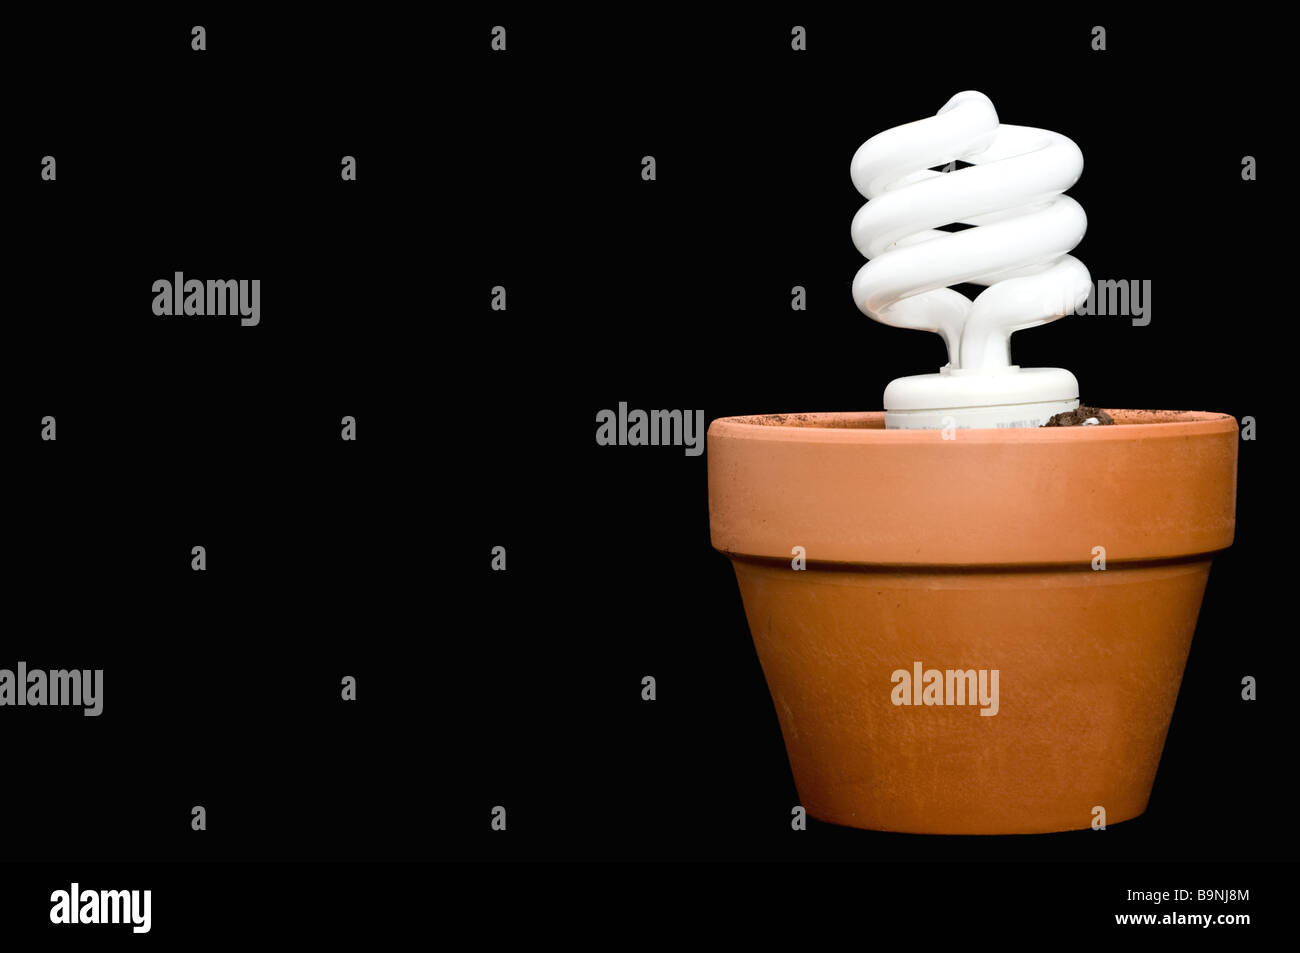 A glowing compact fluorescent bulb in a planter with space for copy on the black background Stock Photo